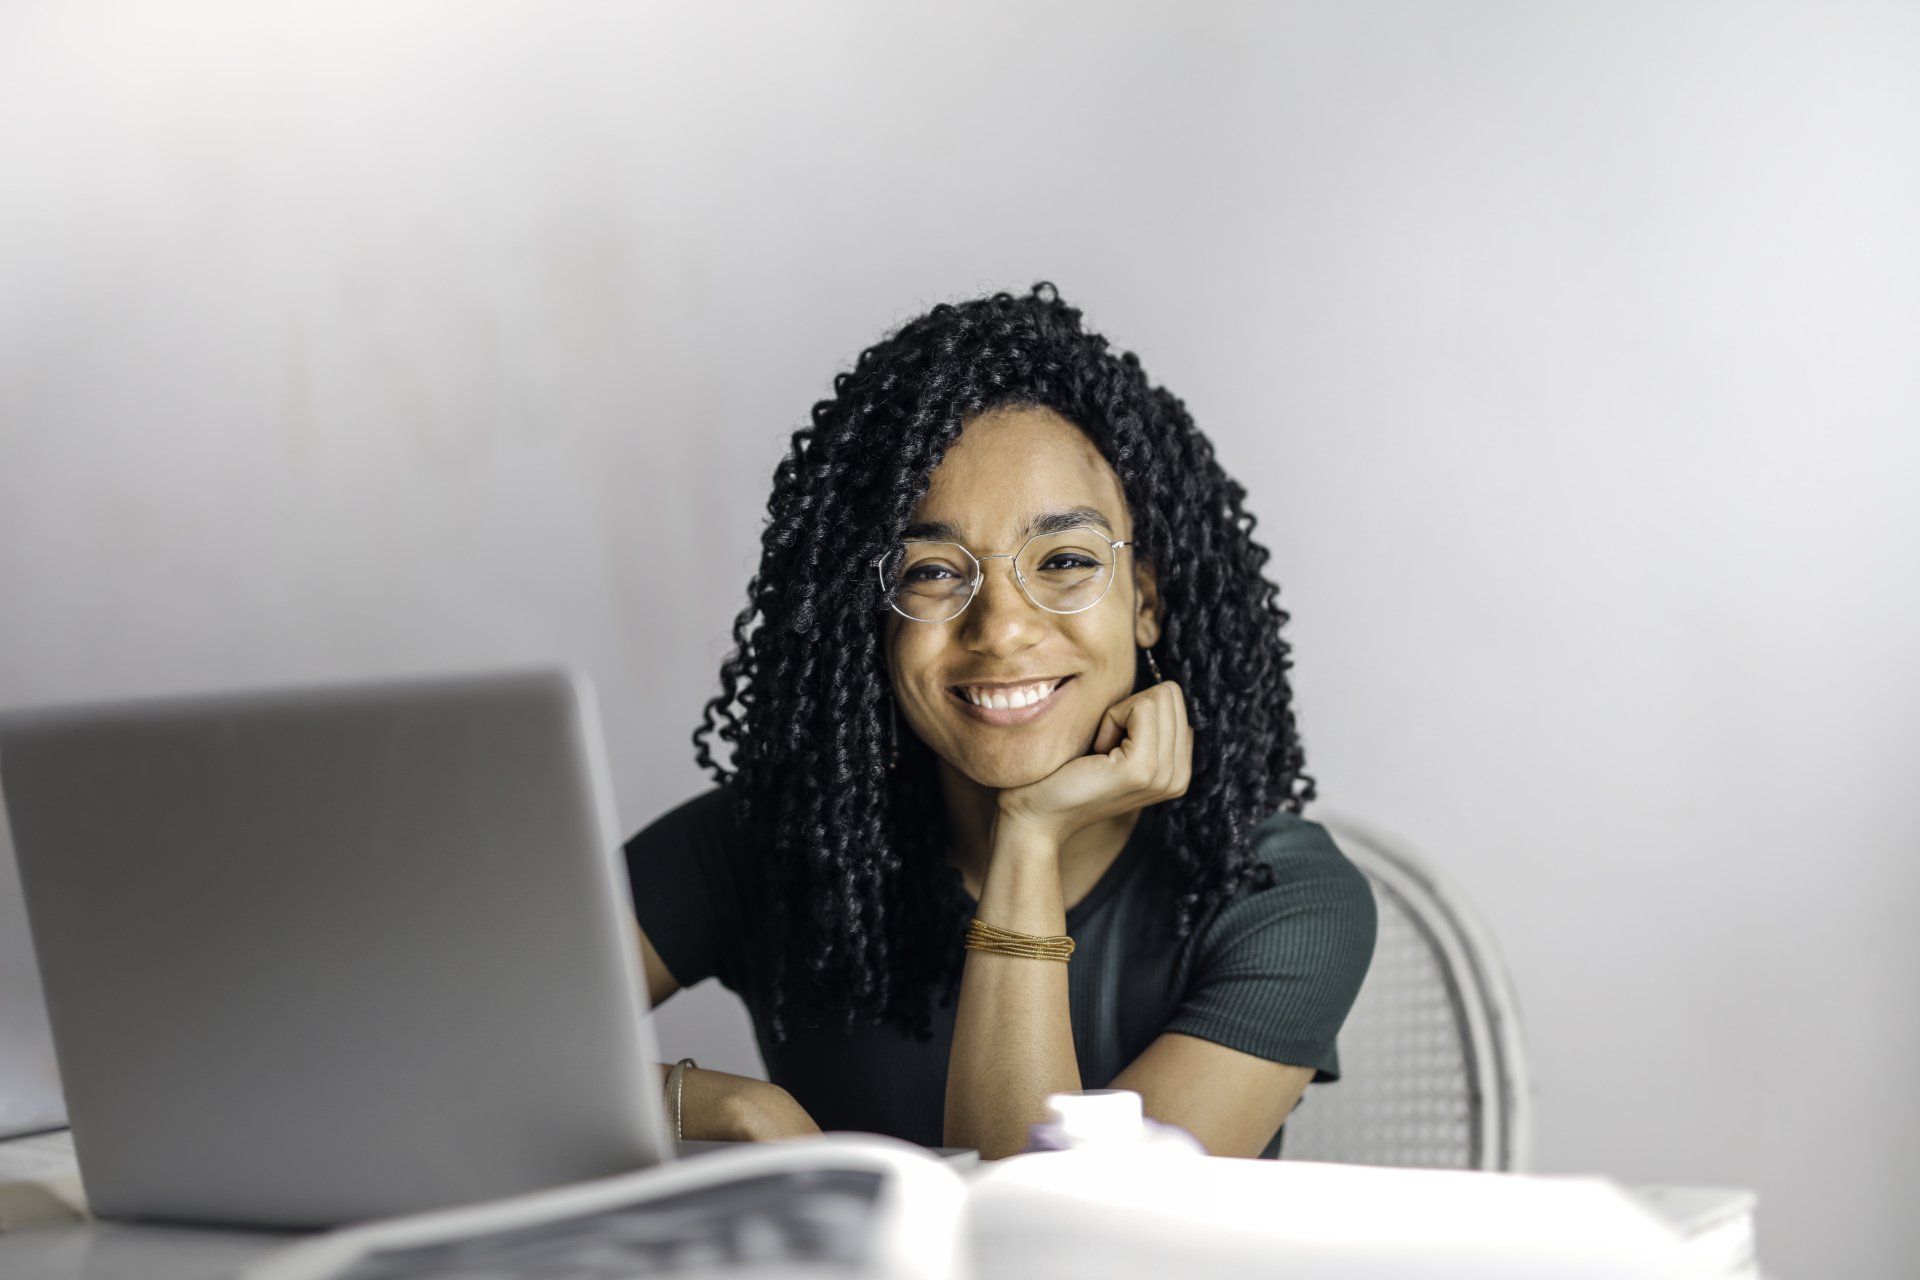 Young woman smiling at the camera while working in front of her laptop